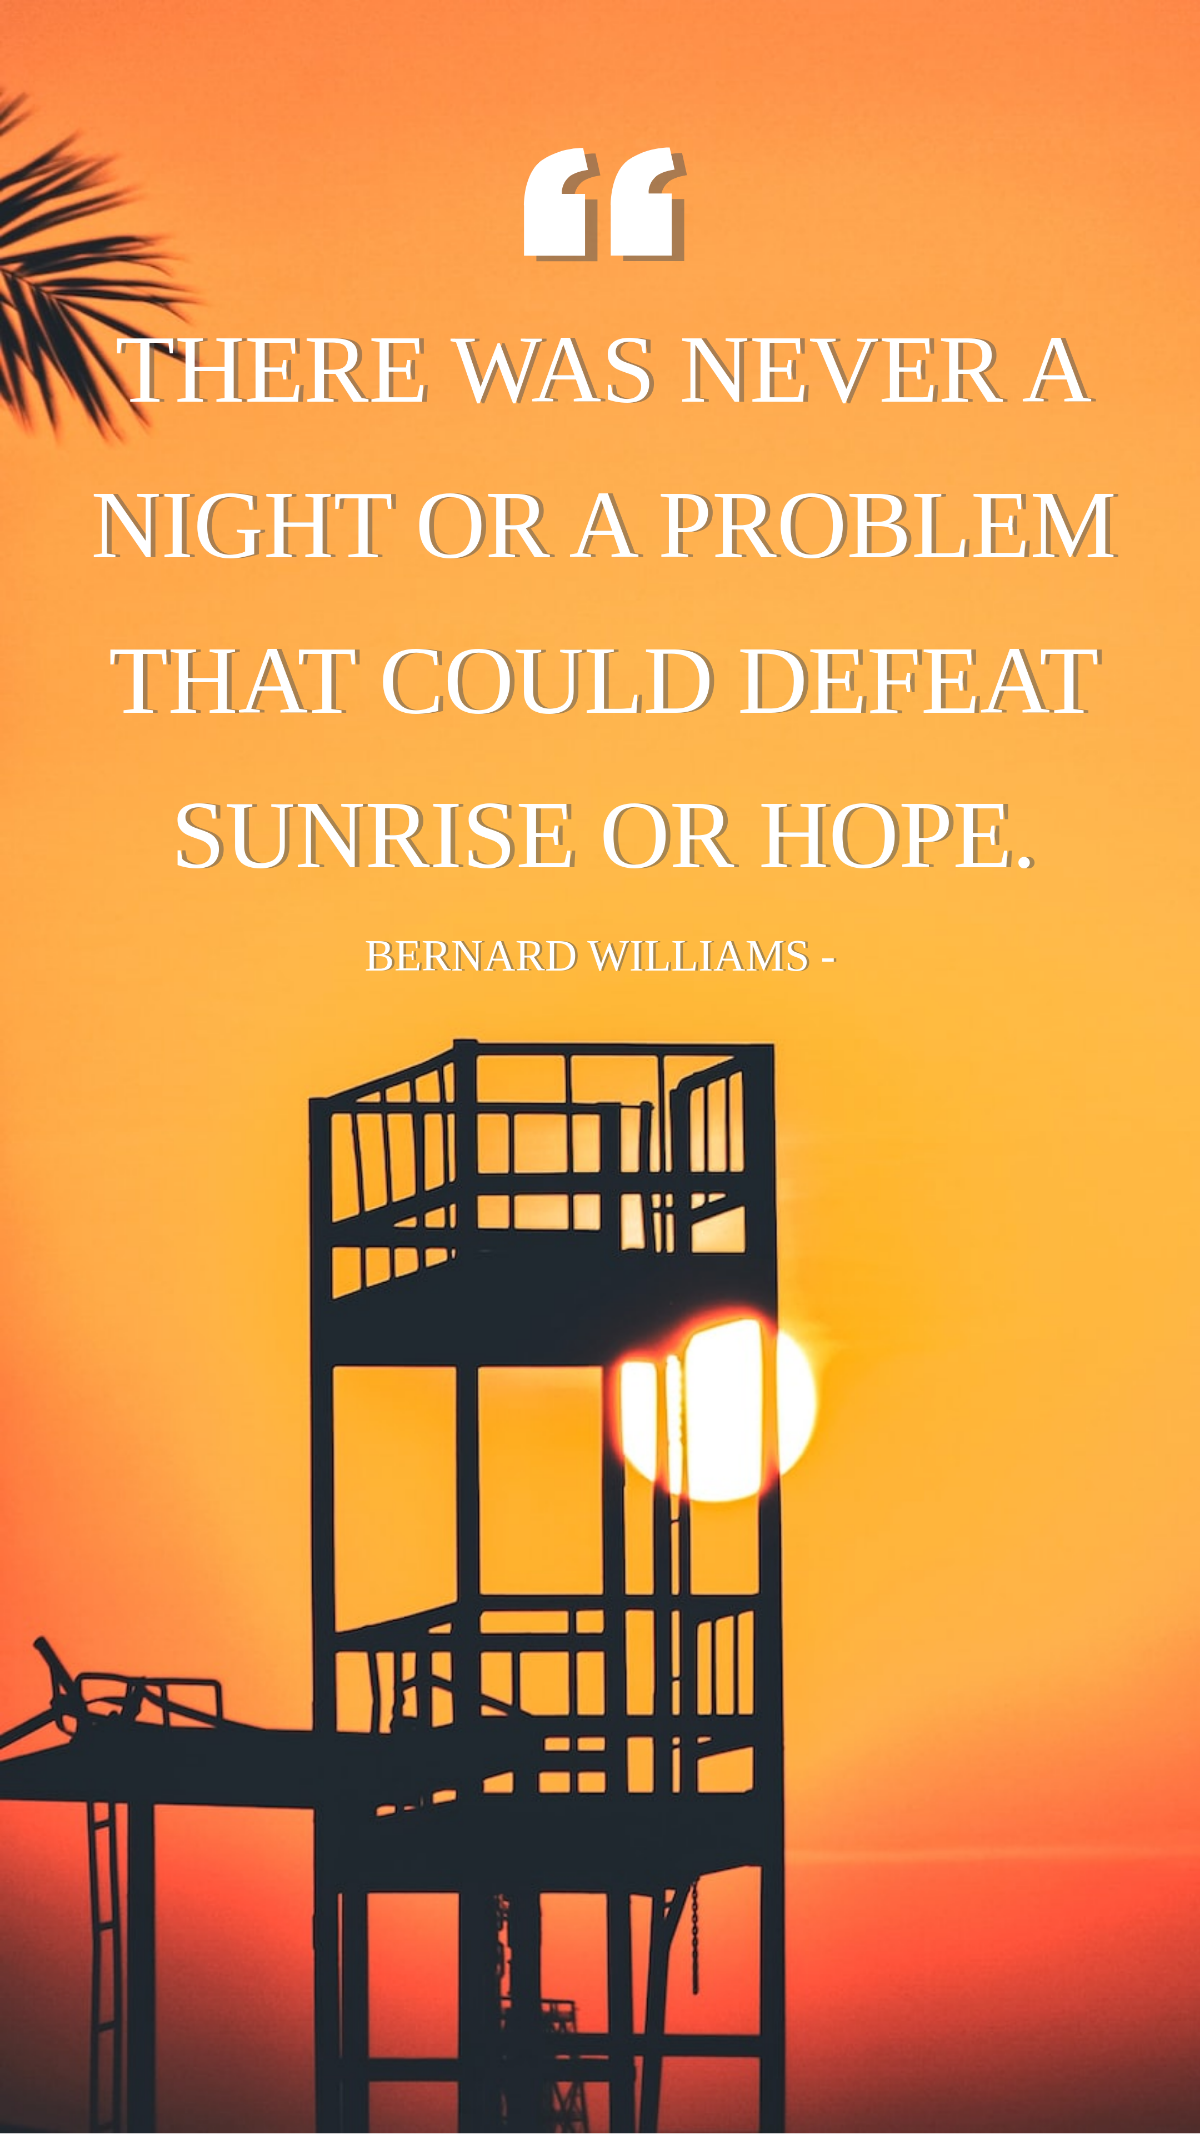 Bernard Williams - There was never a night or a problem that could defeat sunrise or hope. Template